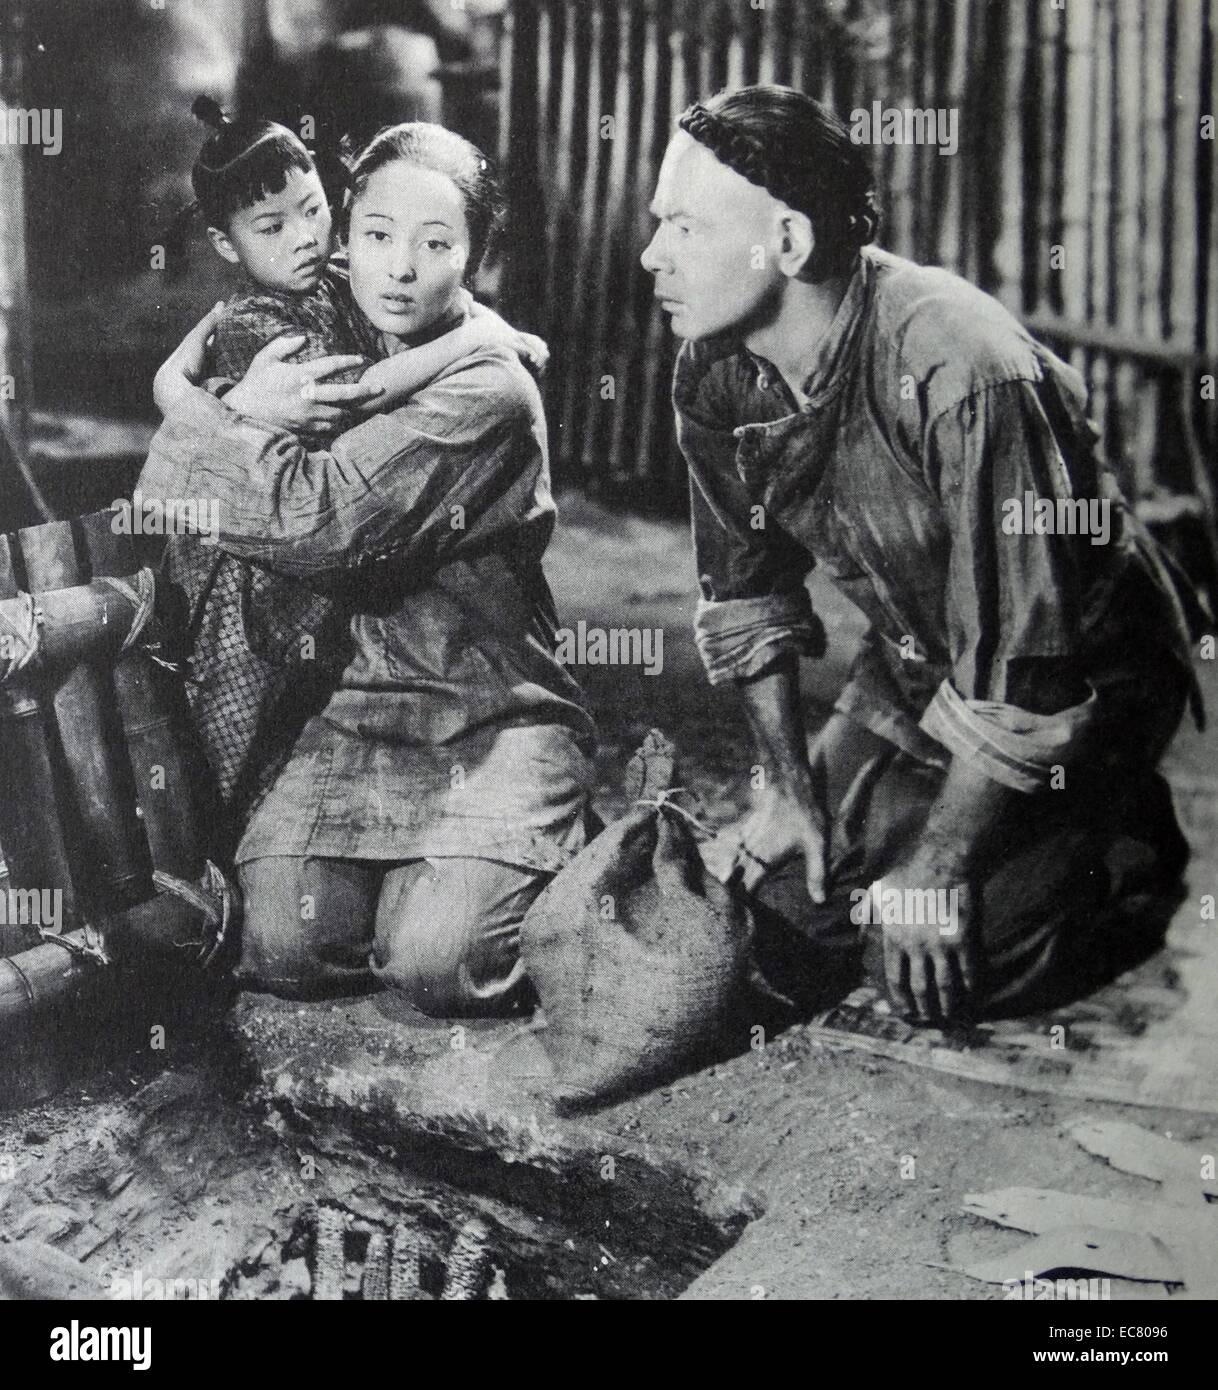 The Good Earth, 1937.  O-Lan and Wang Lung find their food reserve exhausted. The Good Earth is a 1937 American drama film about Chinese farmers who struggle to survive. stars Paul Muni as Wang Lung. For her role as his wife O-Lan, Luise Rainer won an Academy Award for Best Actress Stock Photo